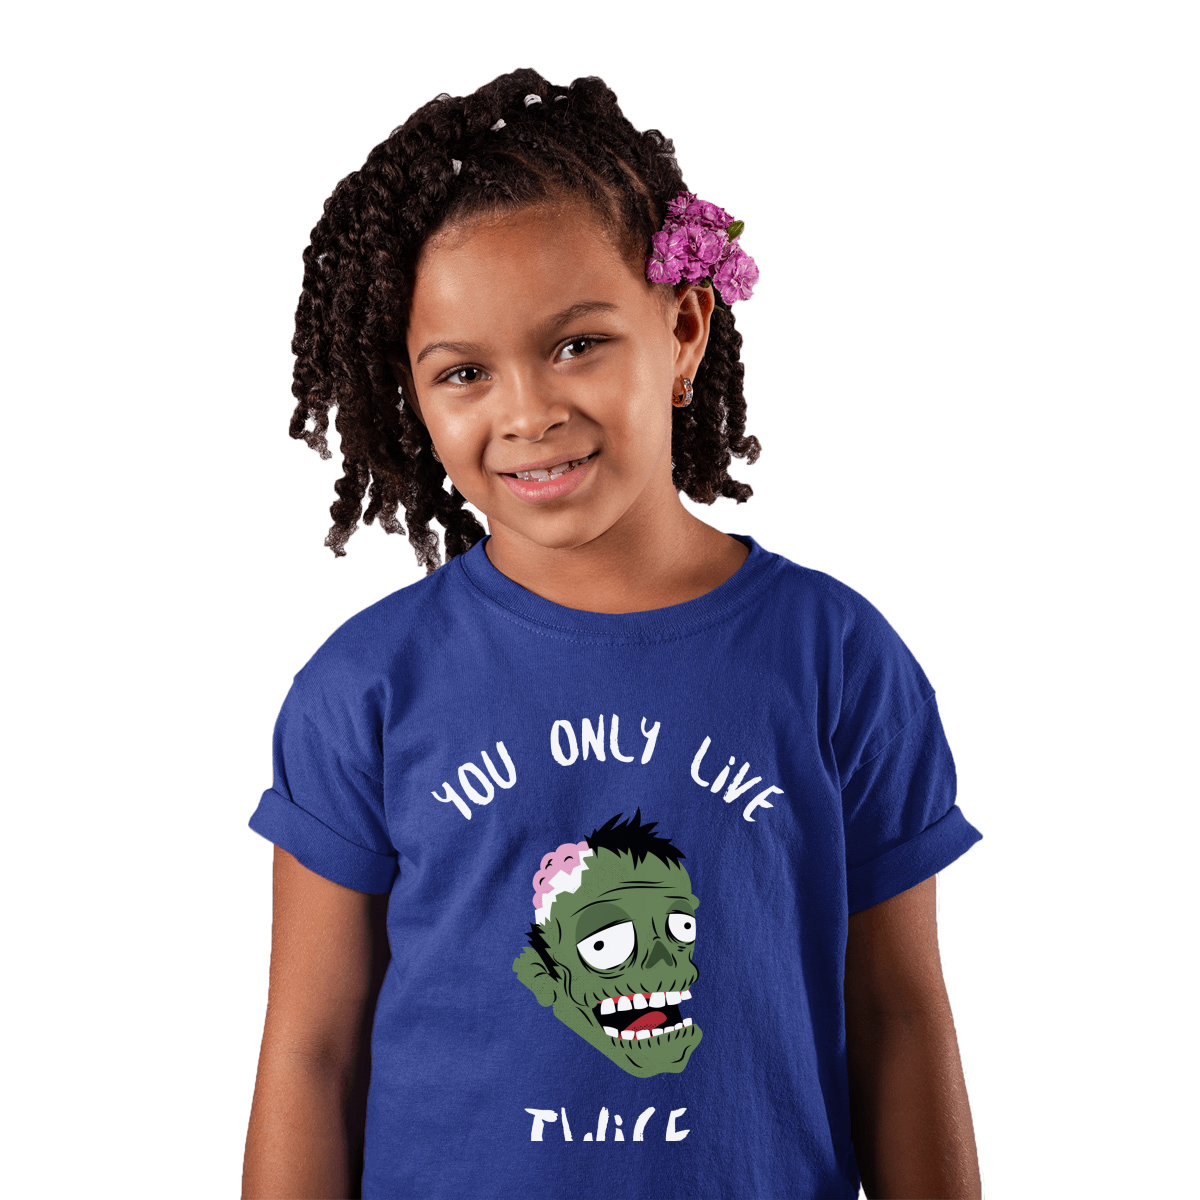 You Only Live Twice Kids T-shirt | Blue